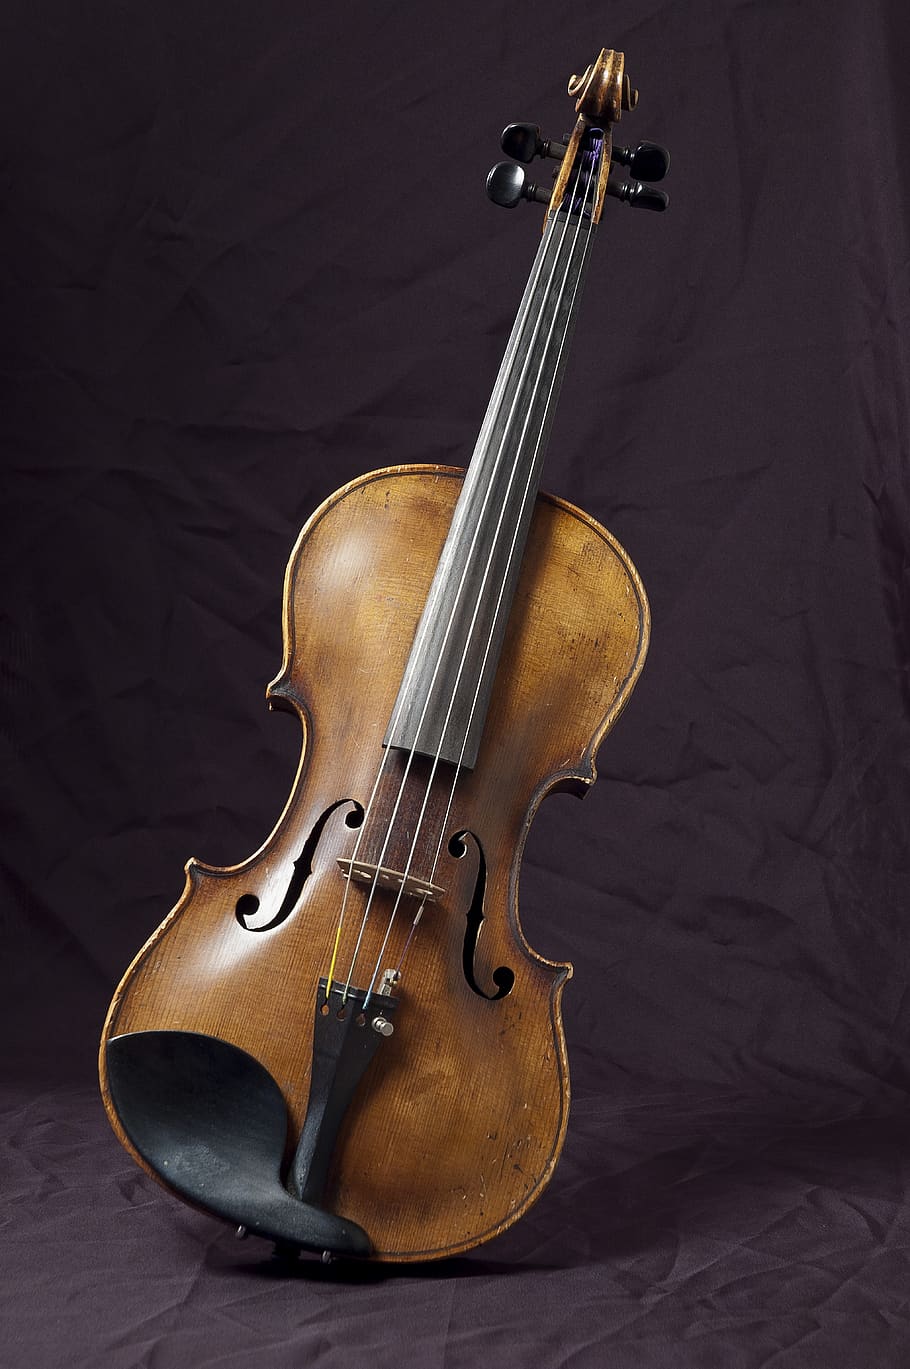 violin, classic, instrument, bowed stringed instrument, orchestra, music, string instrument, musical instrument, arts culture and entertainment, indoors